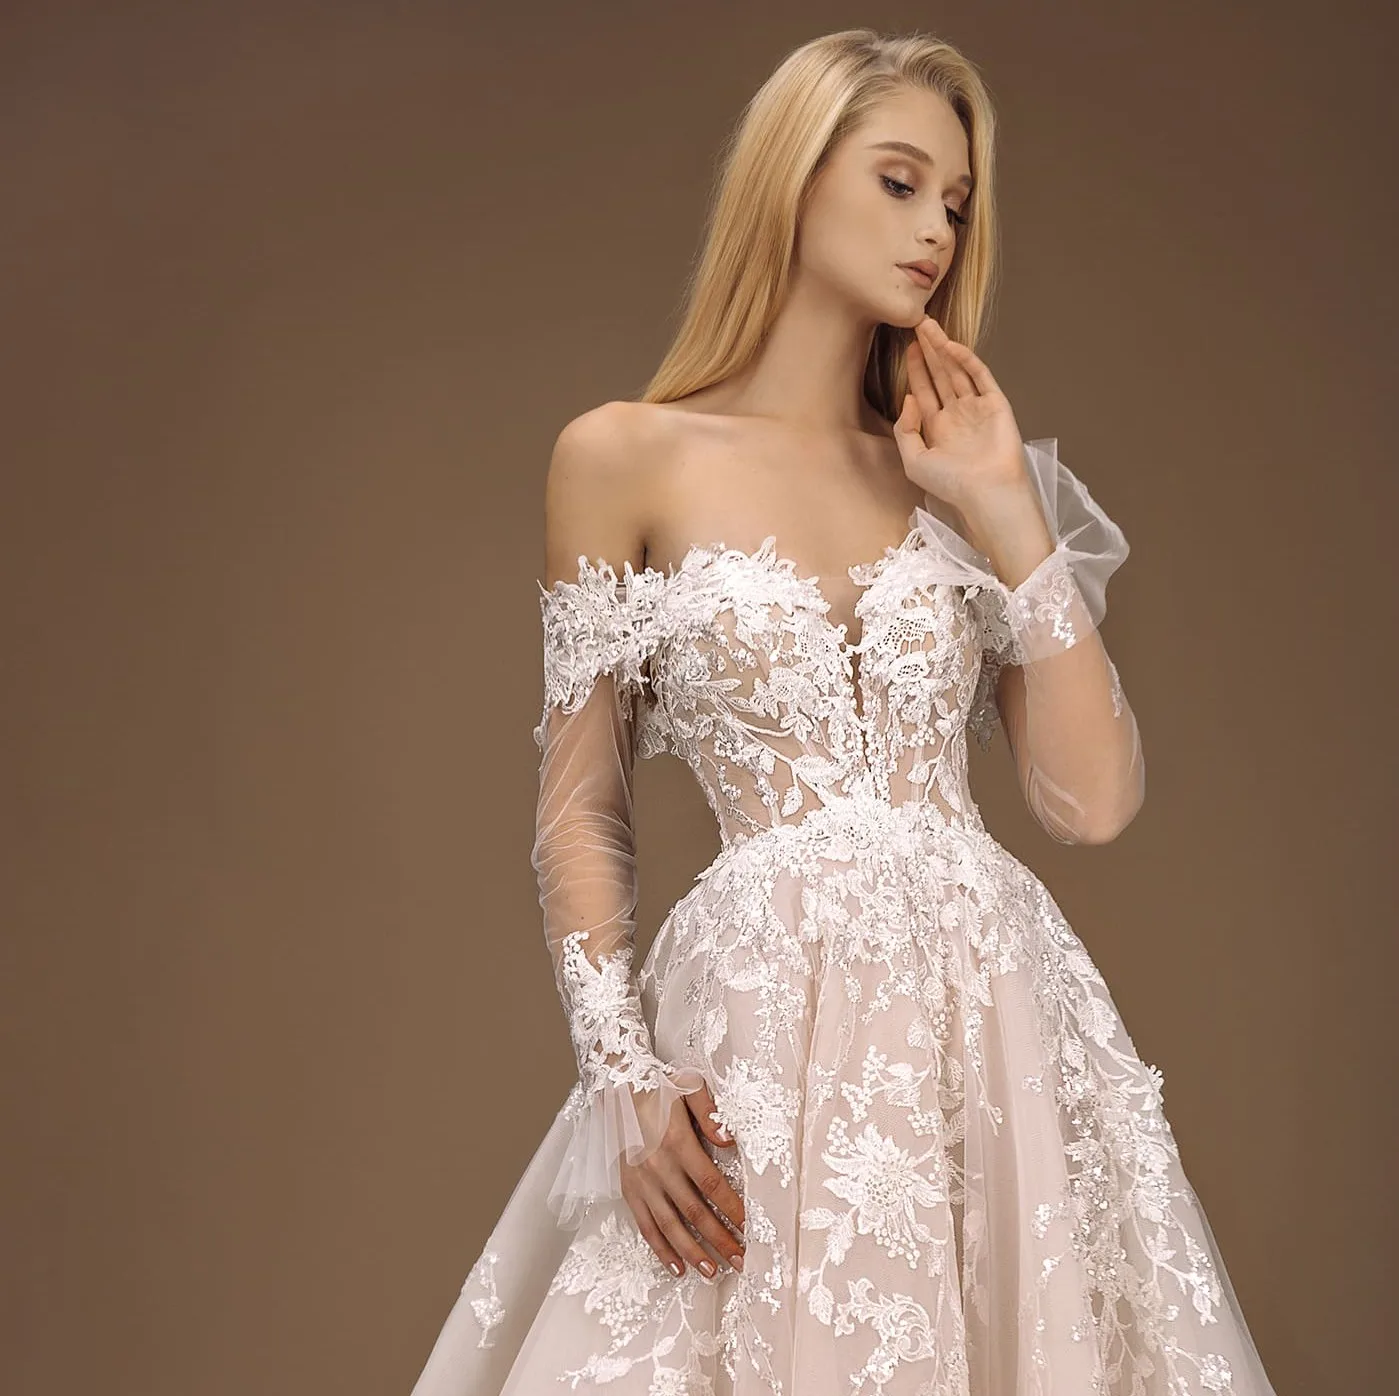 

2020 Latest Elegant Lace Ball Gown Wedding Gown Wedding Dress with Off Shoulder and Lace Sleeve Bridal Gown, As customer's require